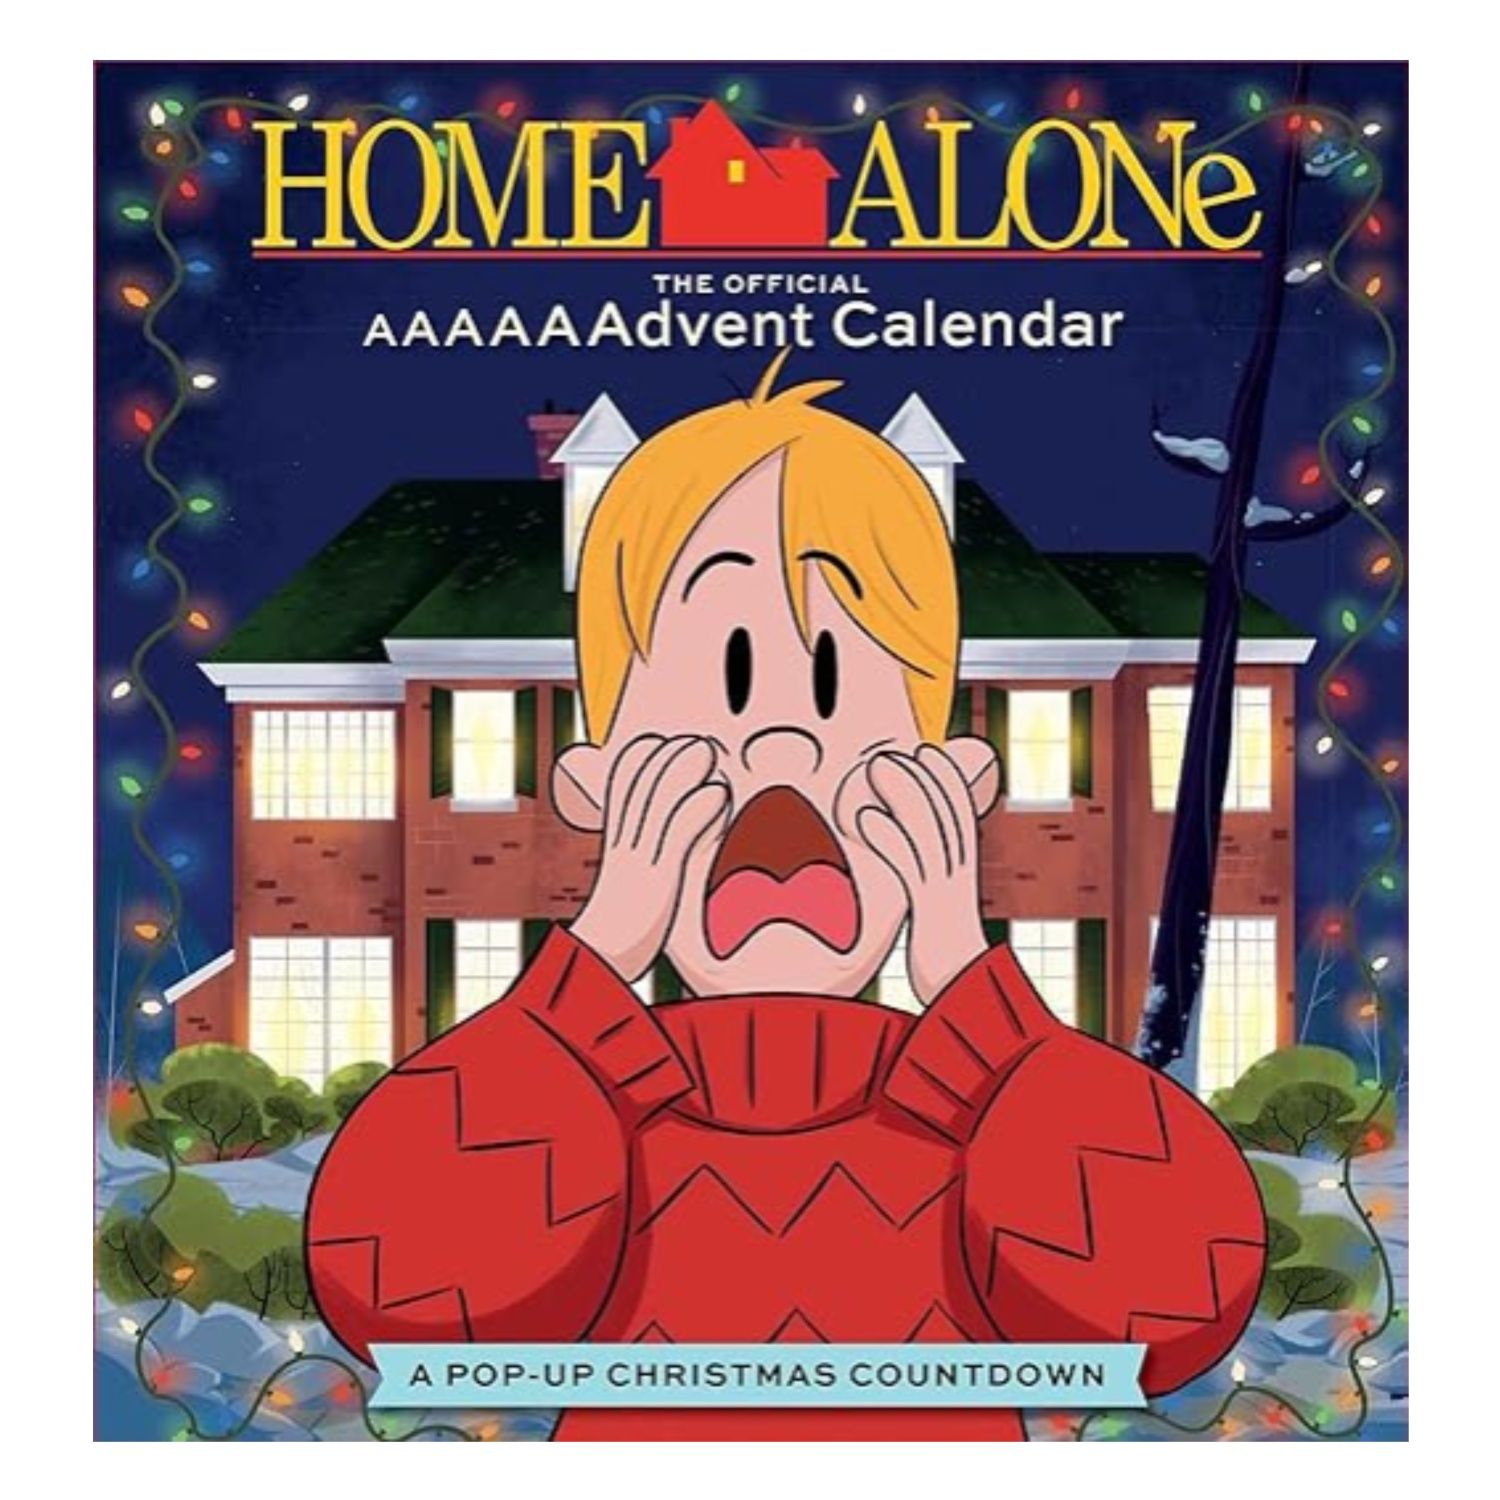 This image depicts the front of the Home Alone Advent Calendar with a cartoon Kevin McCallister